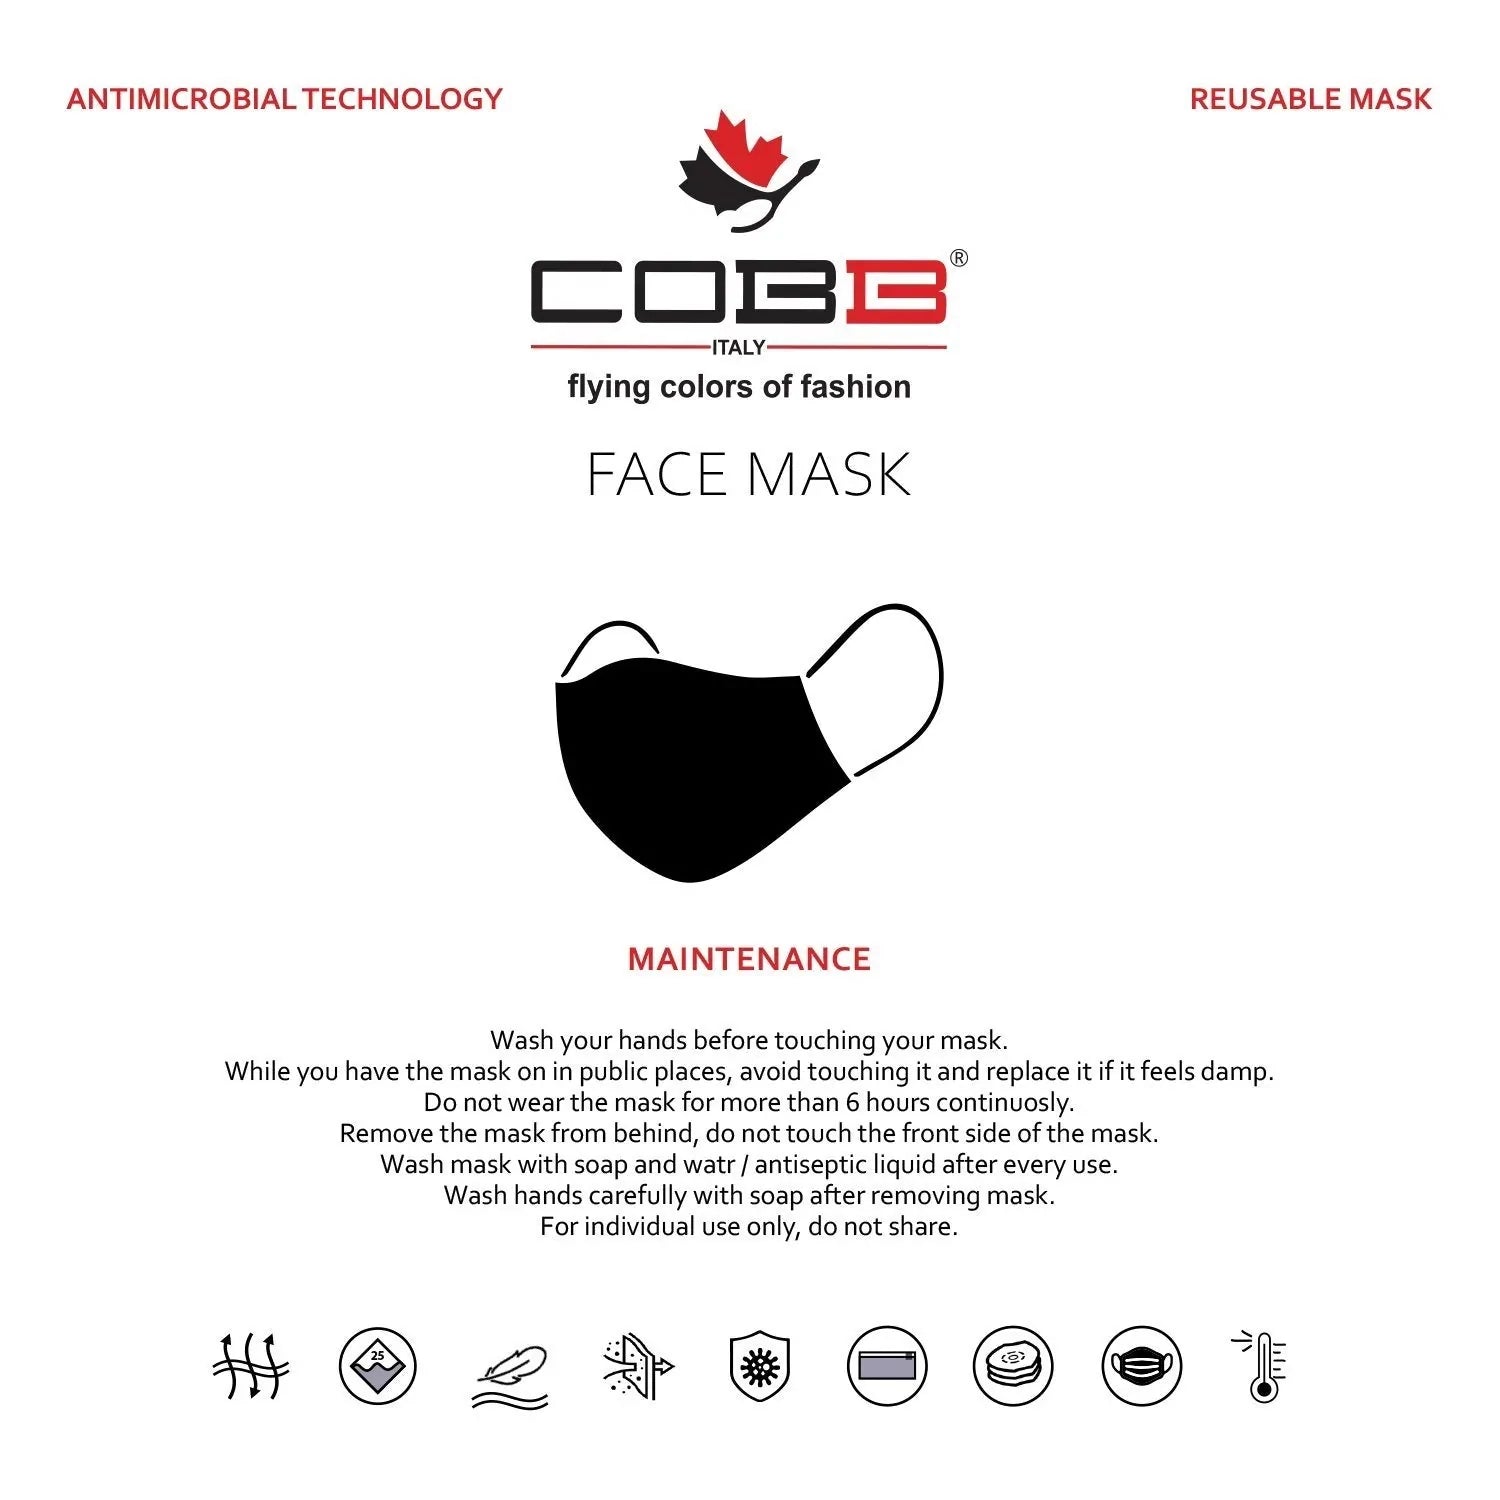 Cobb Unisex 3 Layer Printed Cotton Mask Pack of 5 (Assorted Design)